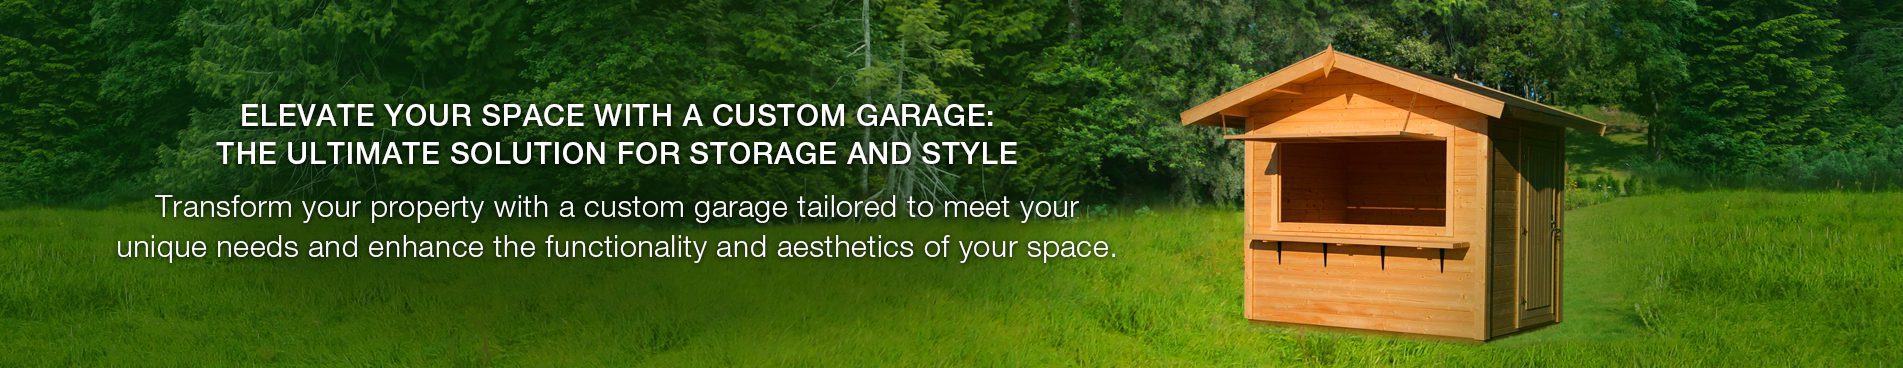 Elevate Your Space with a Custom Garage: The Ultimate Solution for Storage and Style